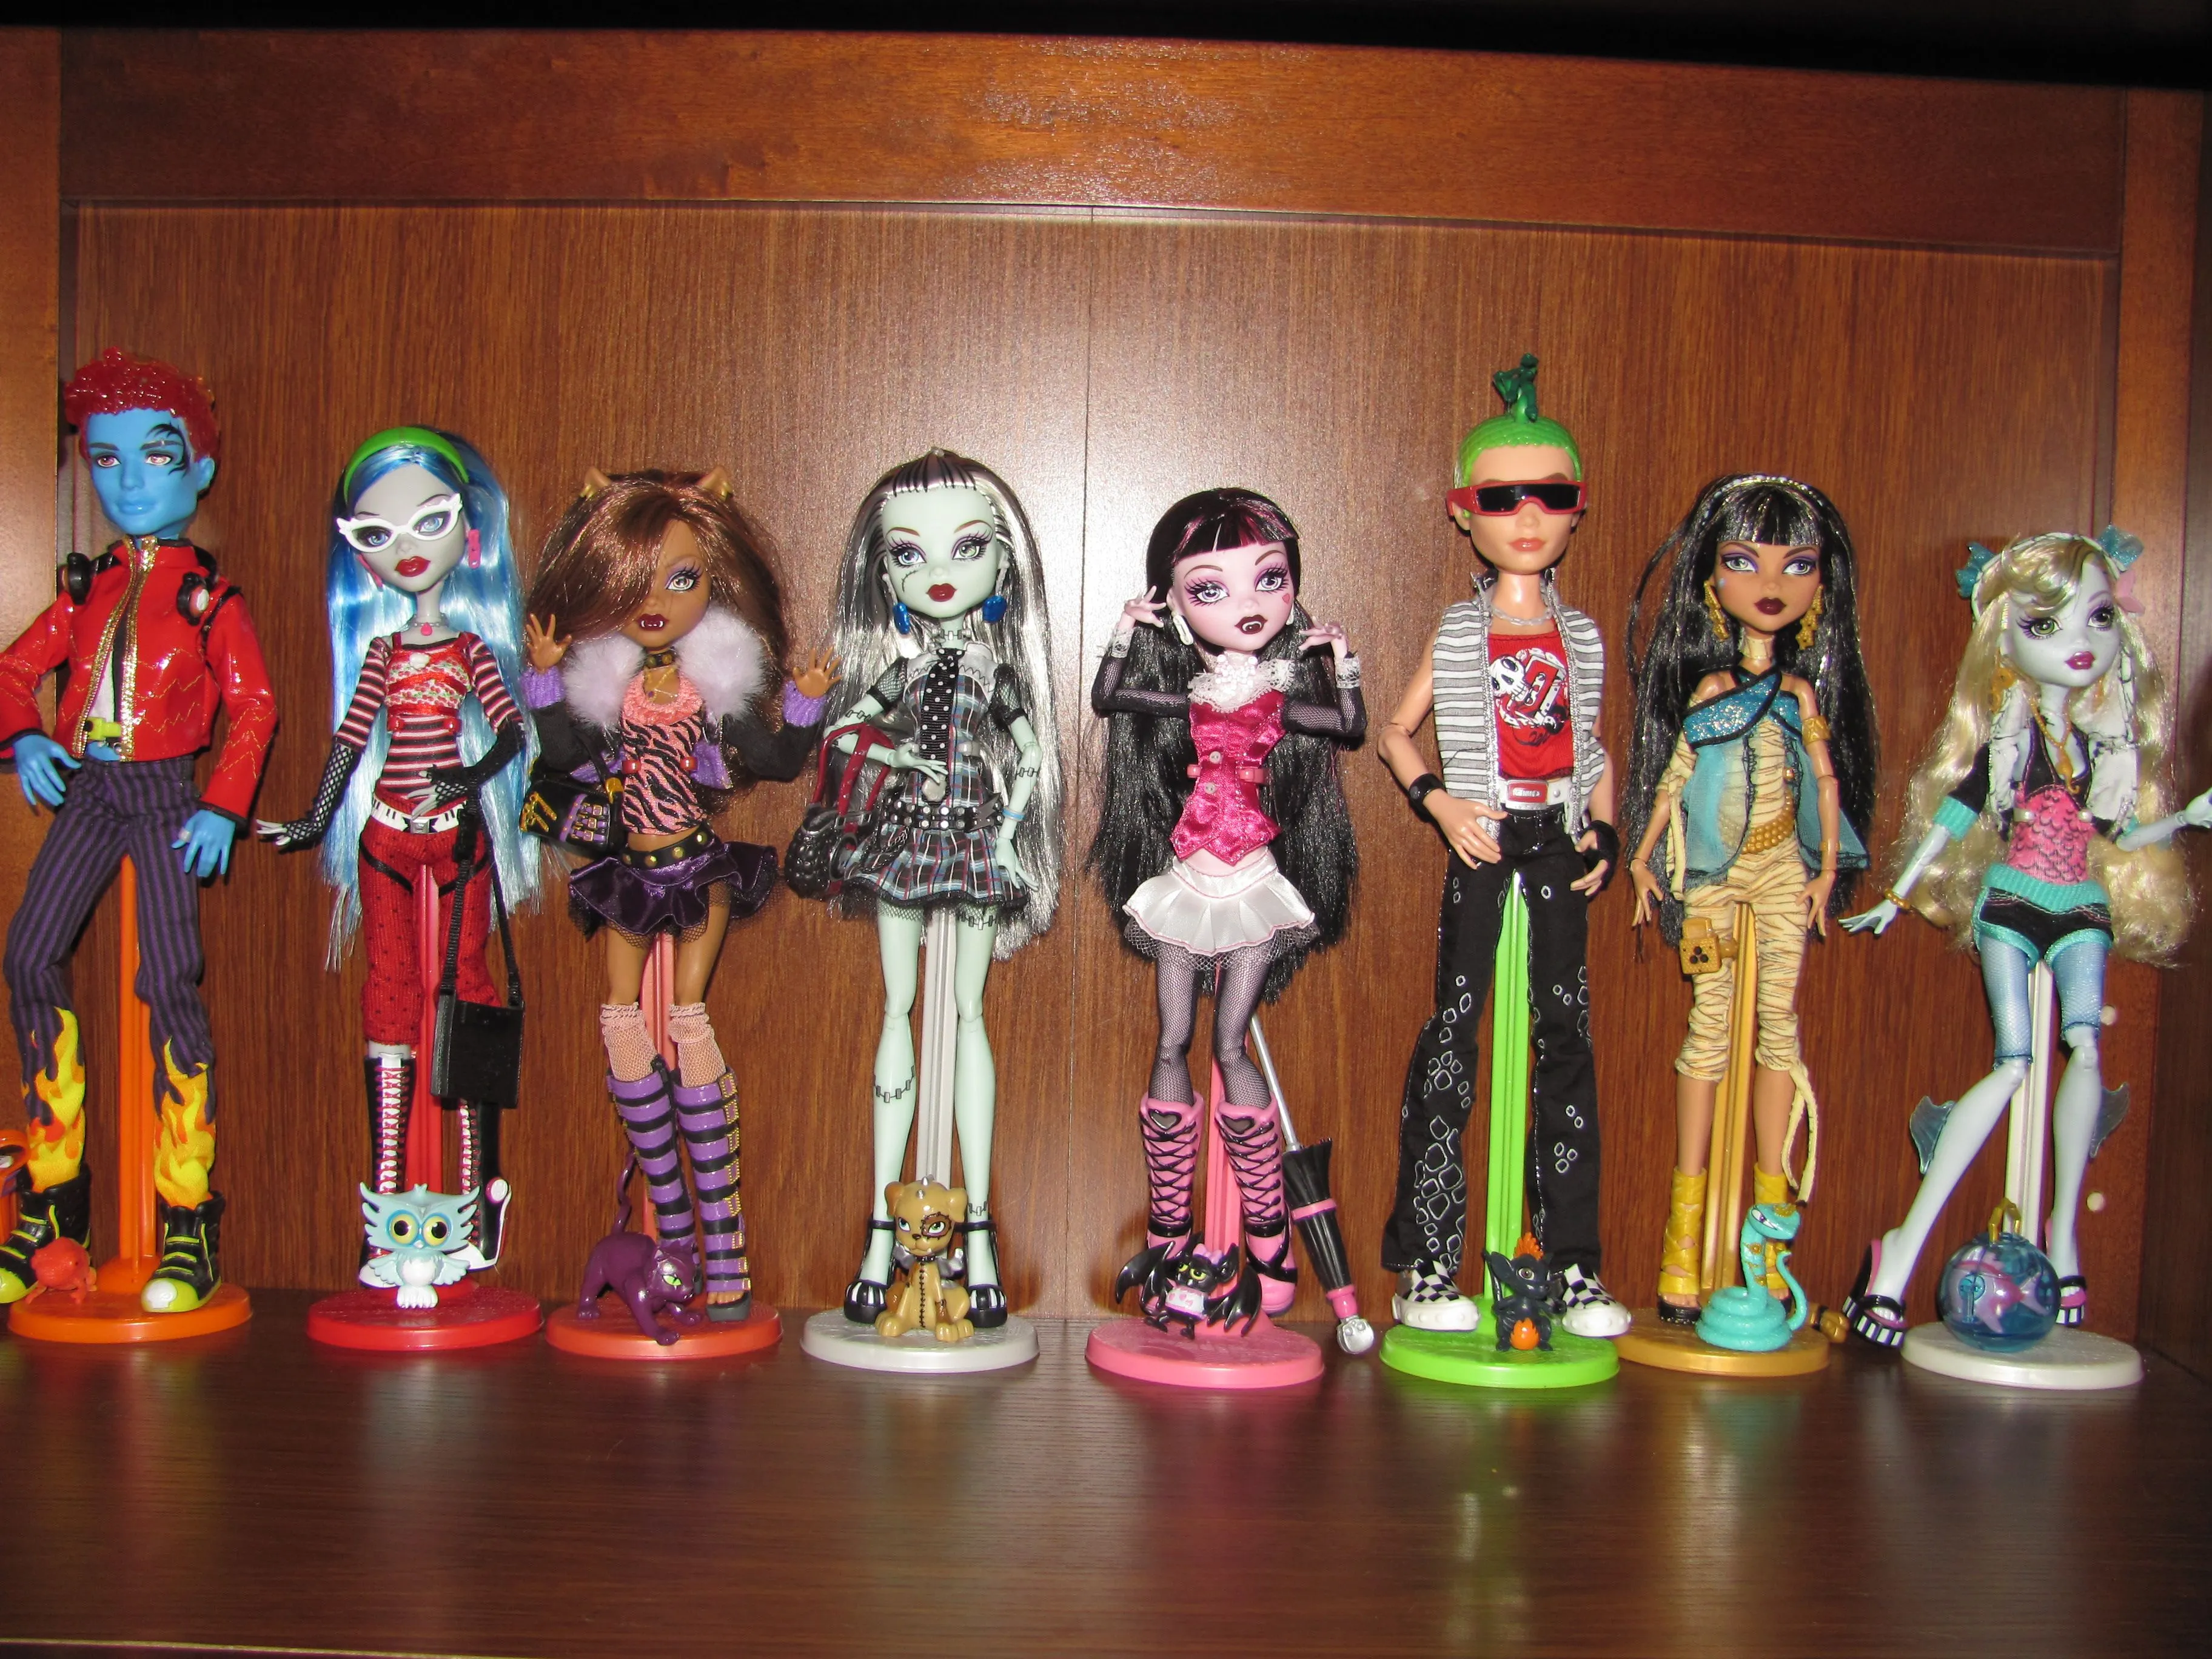 Monster High Doll Collection | Flickr - Photo Sharing!